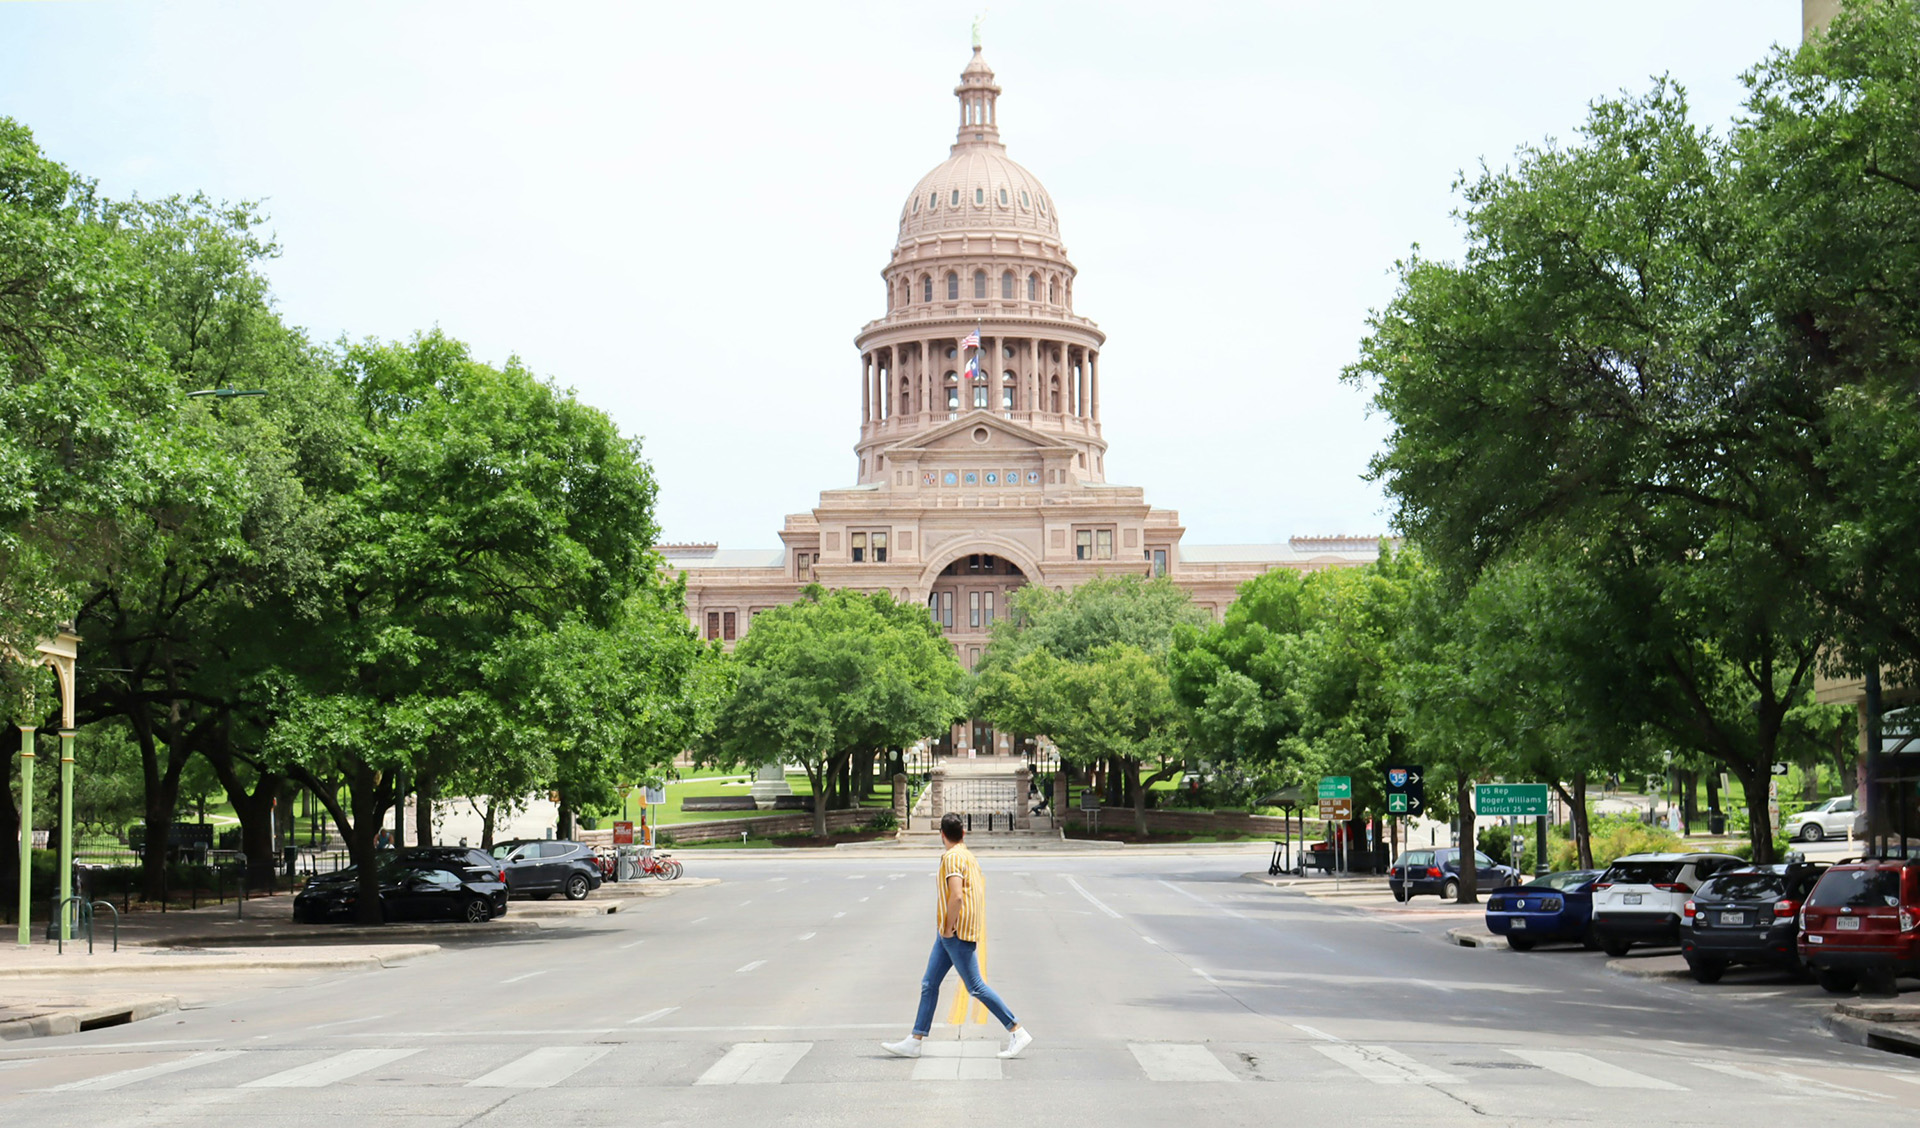 Texas state capitol